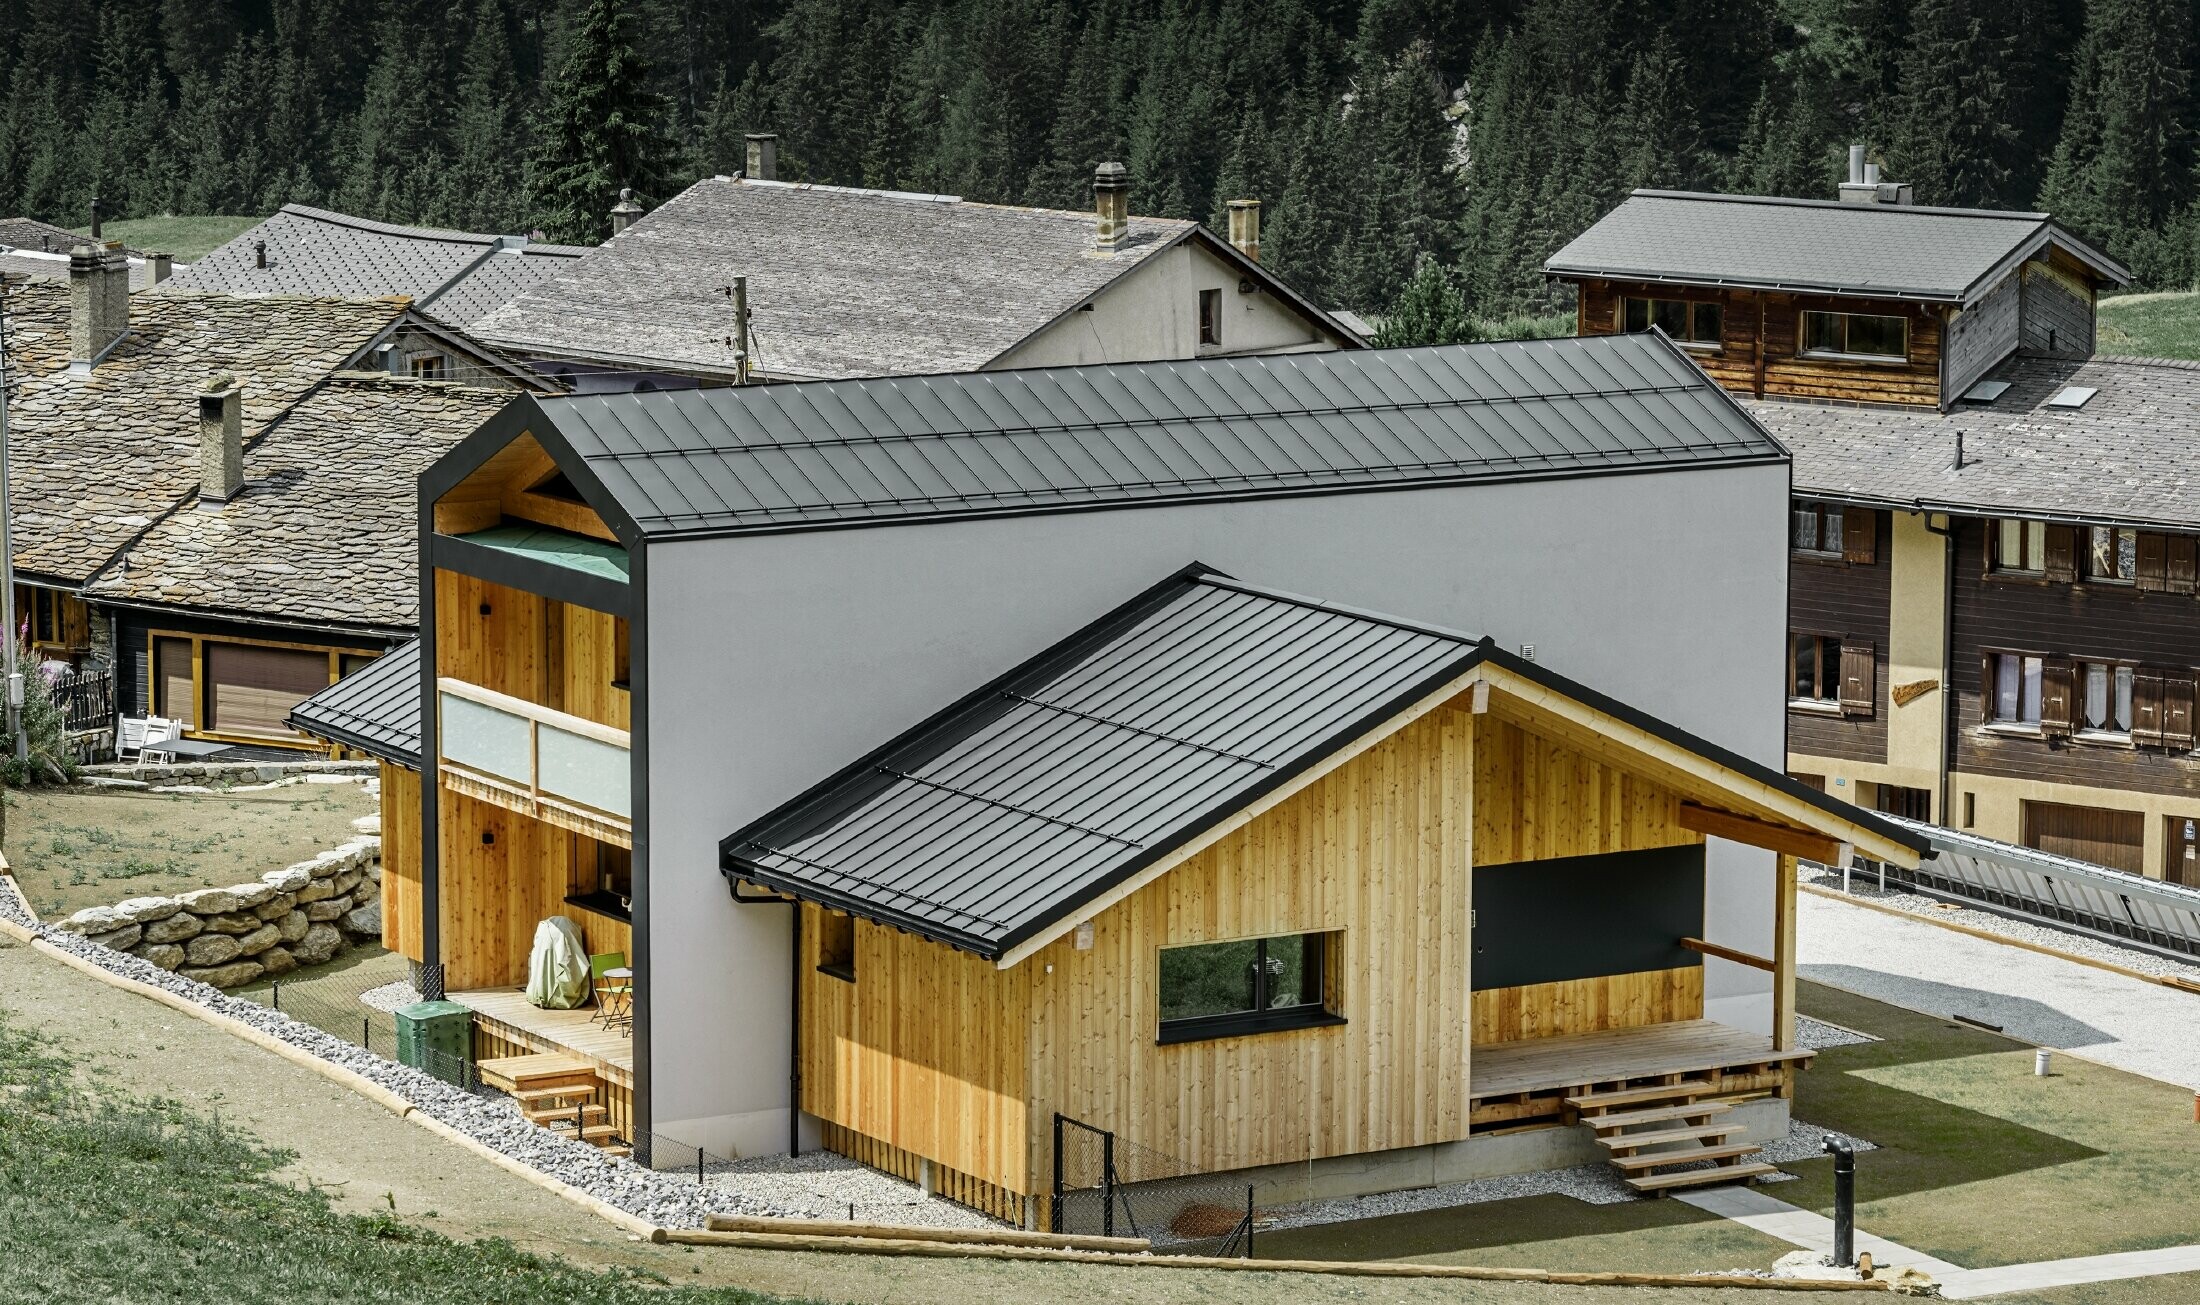 This detached house gives the impression of 2 houses positioned on top of one another at a 90° angle. The roof is clad in black Prefalz and the façade is partly in wood.